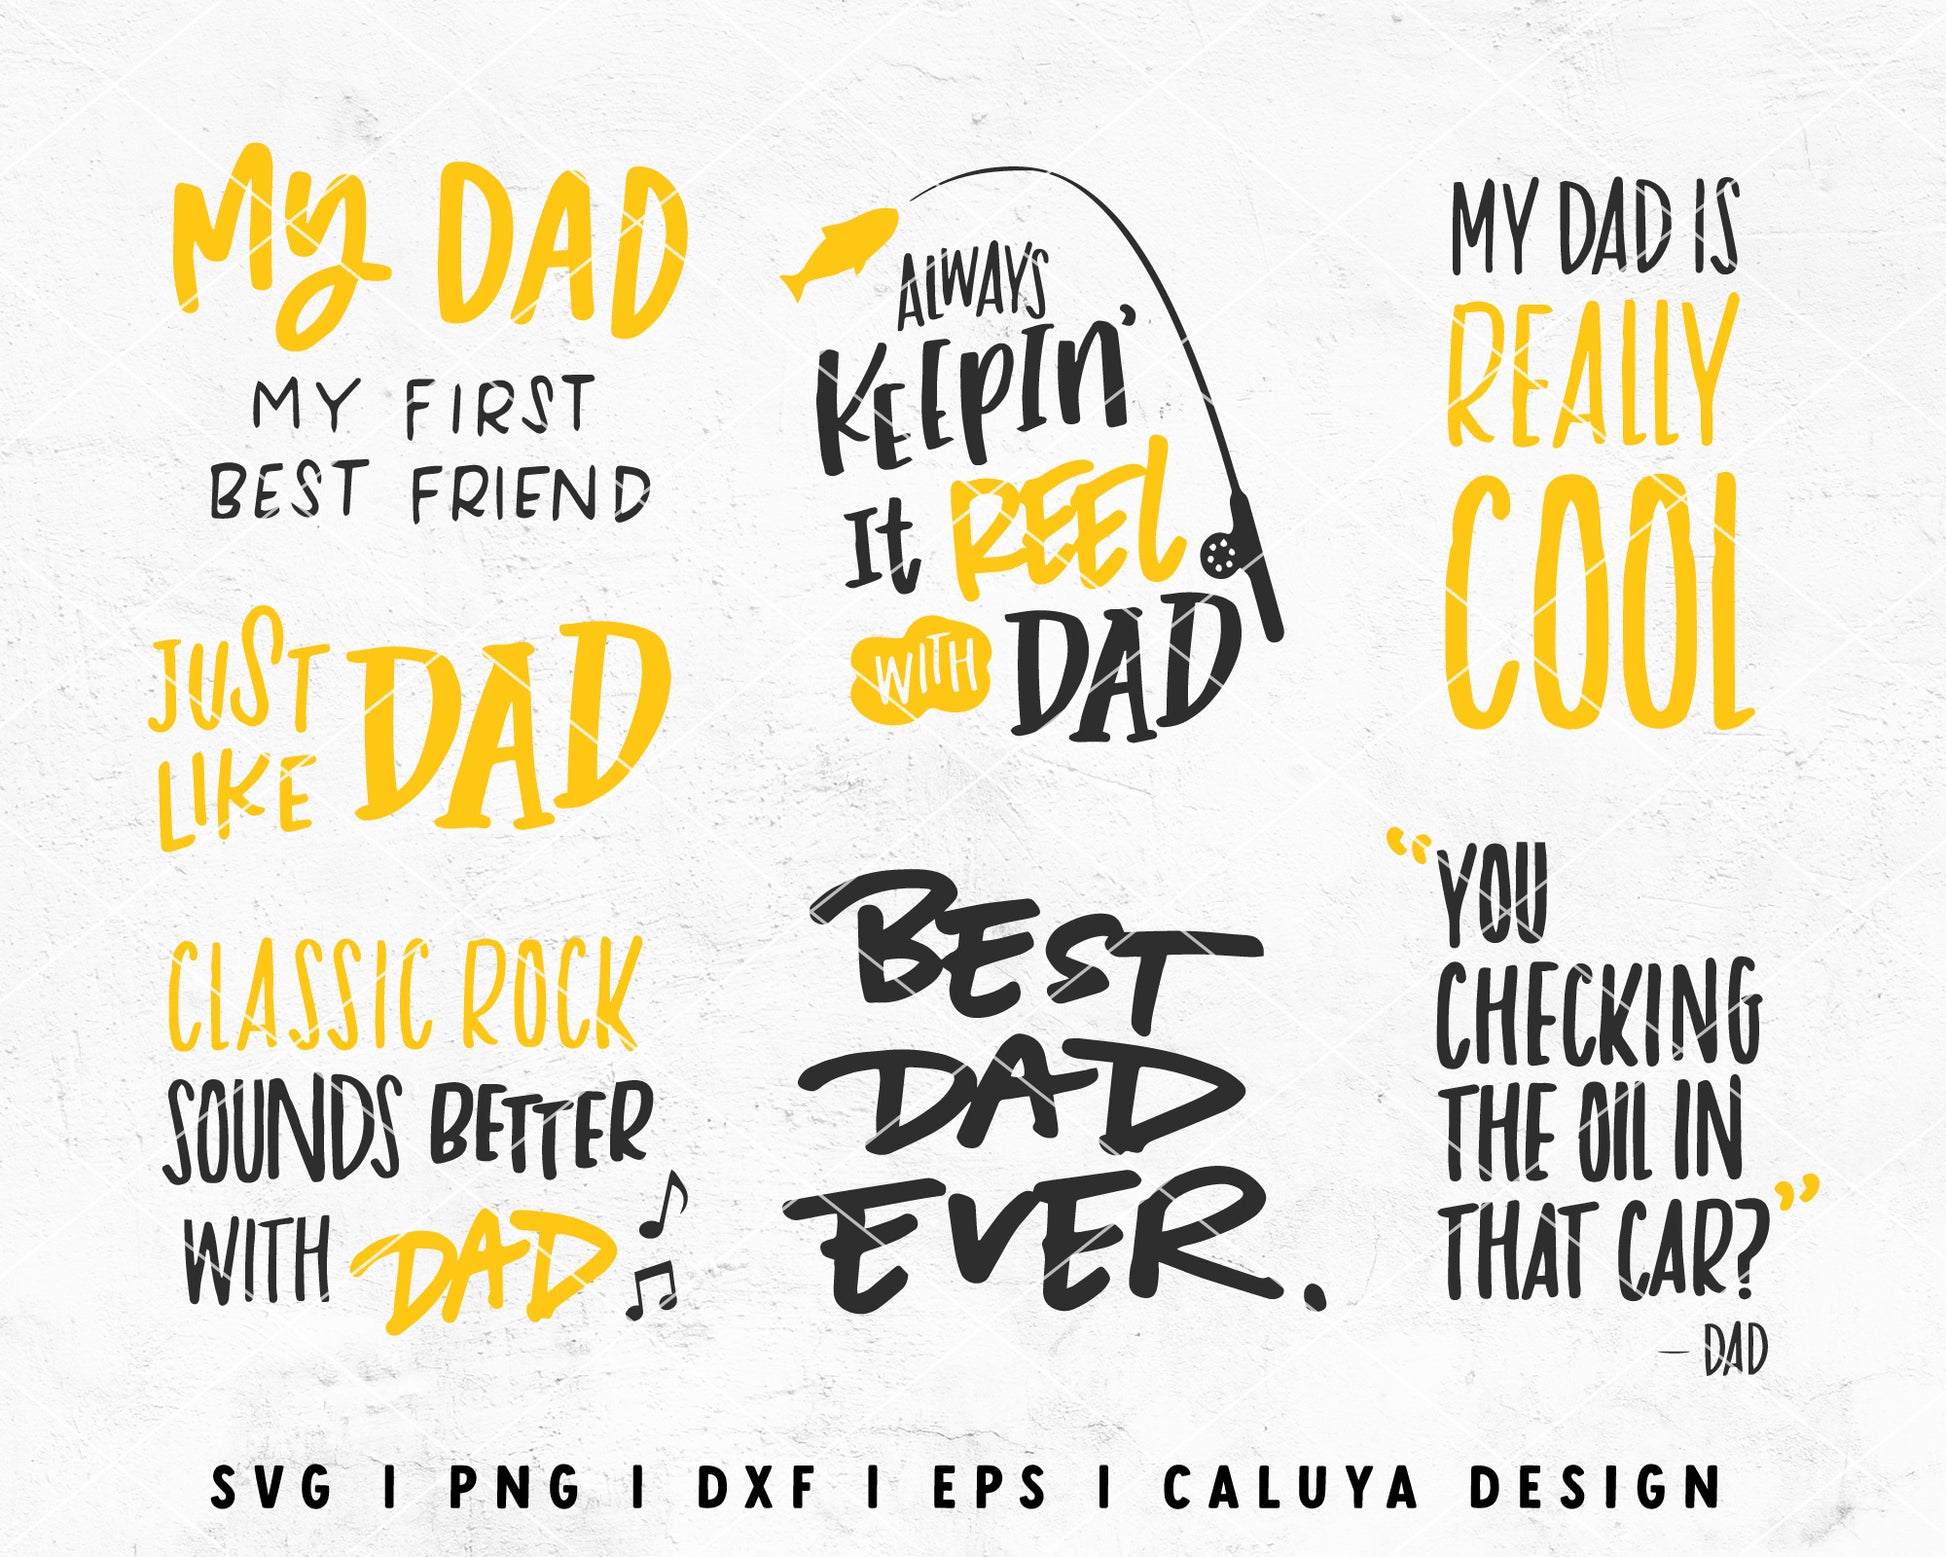 FREE Dad Quote SVG | Father's Day SVG Cut File for Cricut, Cameo Silhouette | Free SVG Cut File